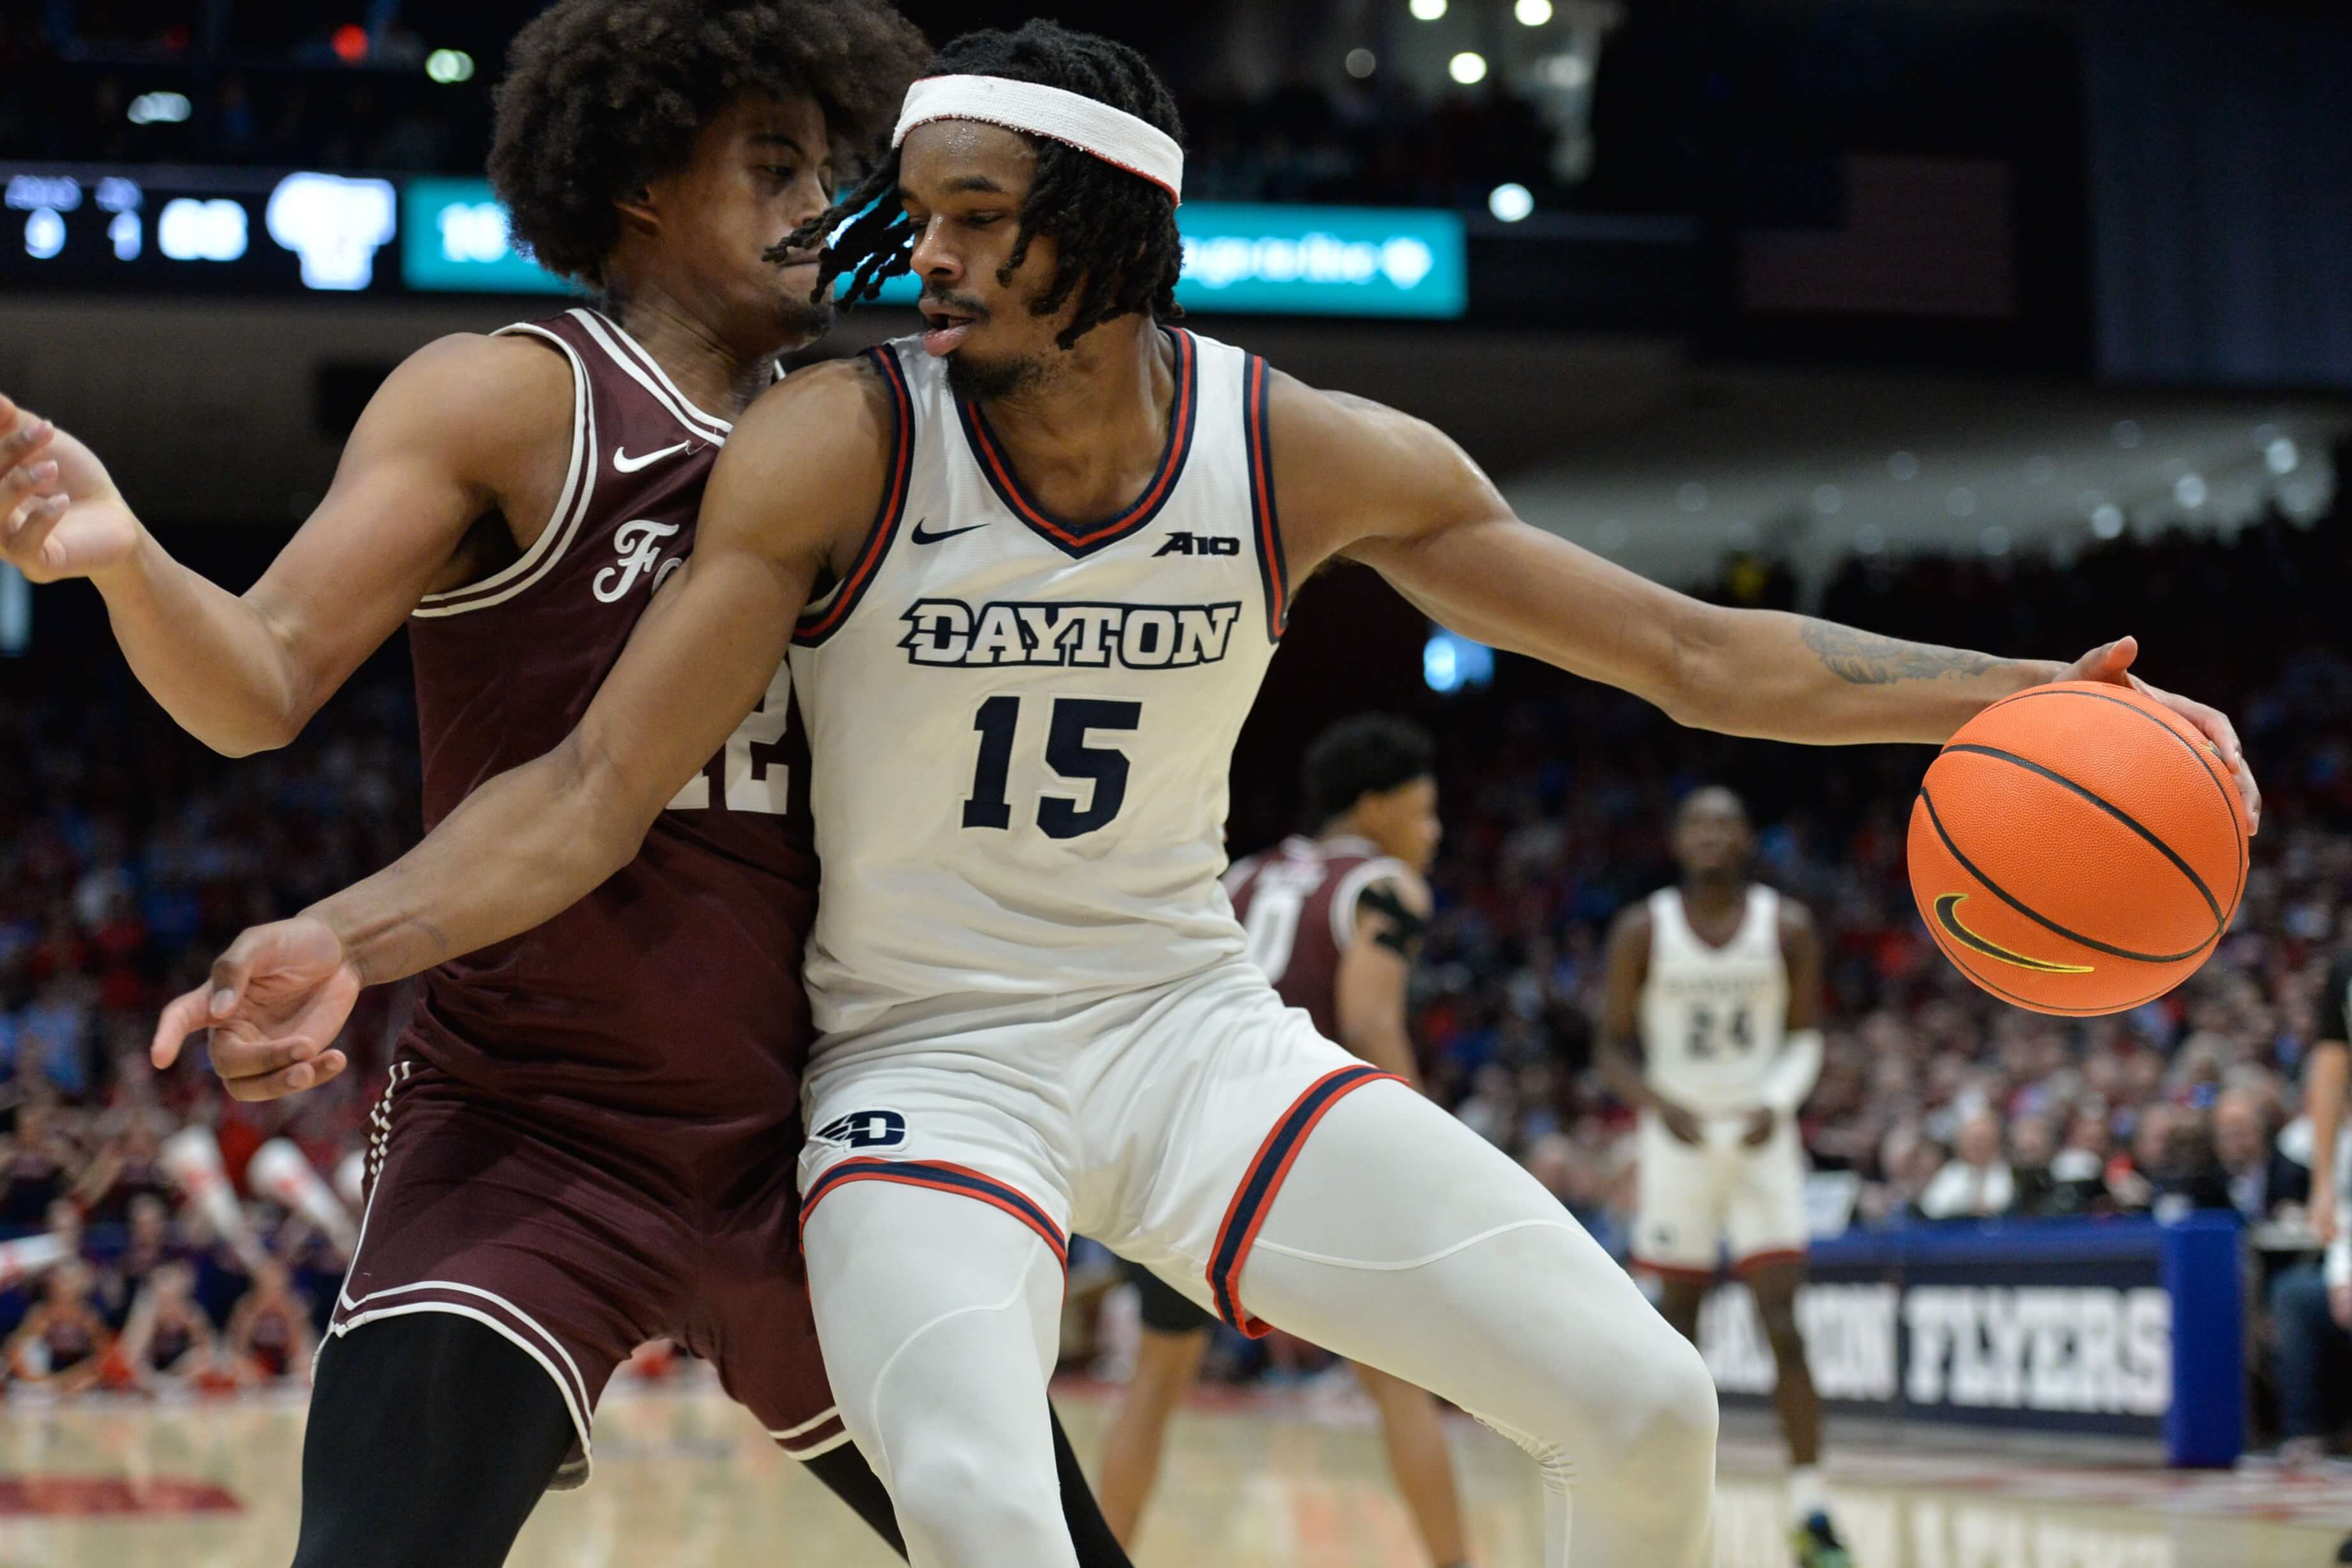 Dayton vs Loyola Chicago Odds, Picks and Predictions: Holmes, Watson Hounded by Opposing Defenses 